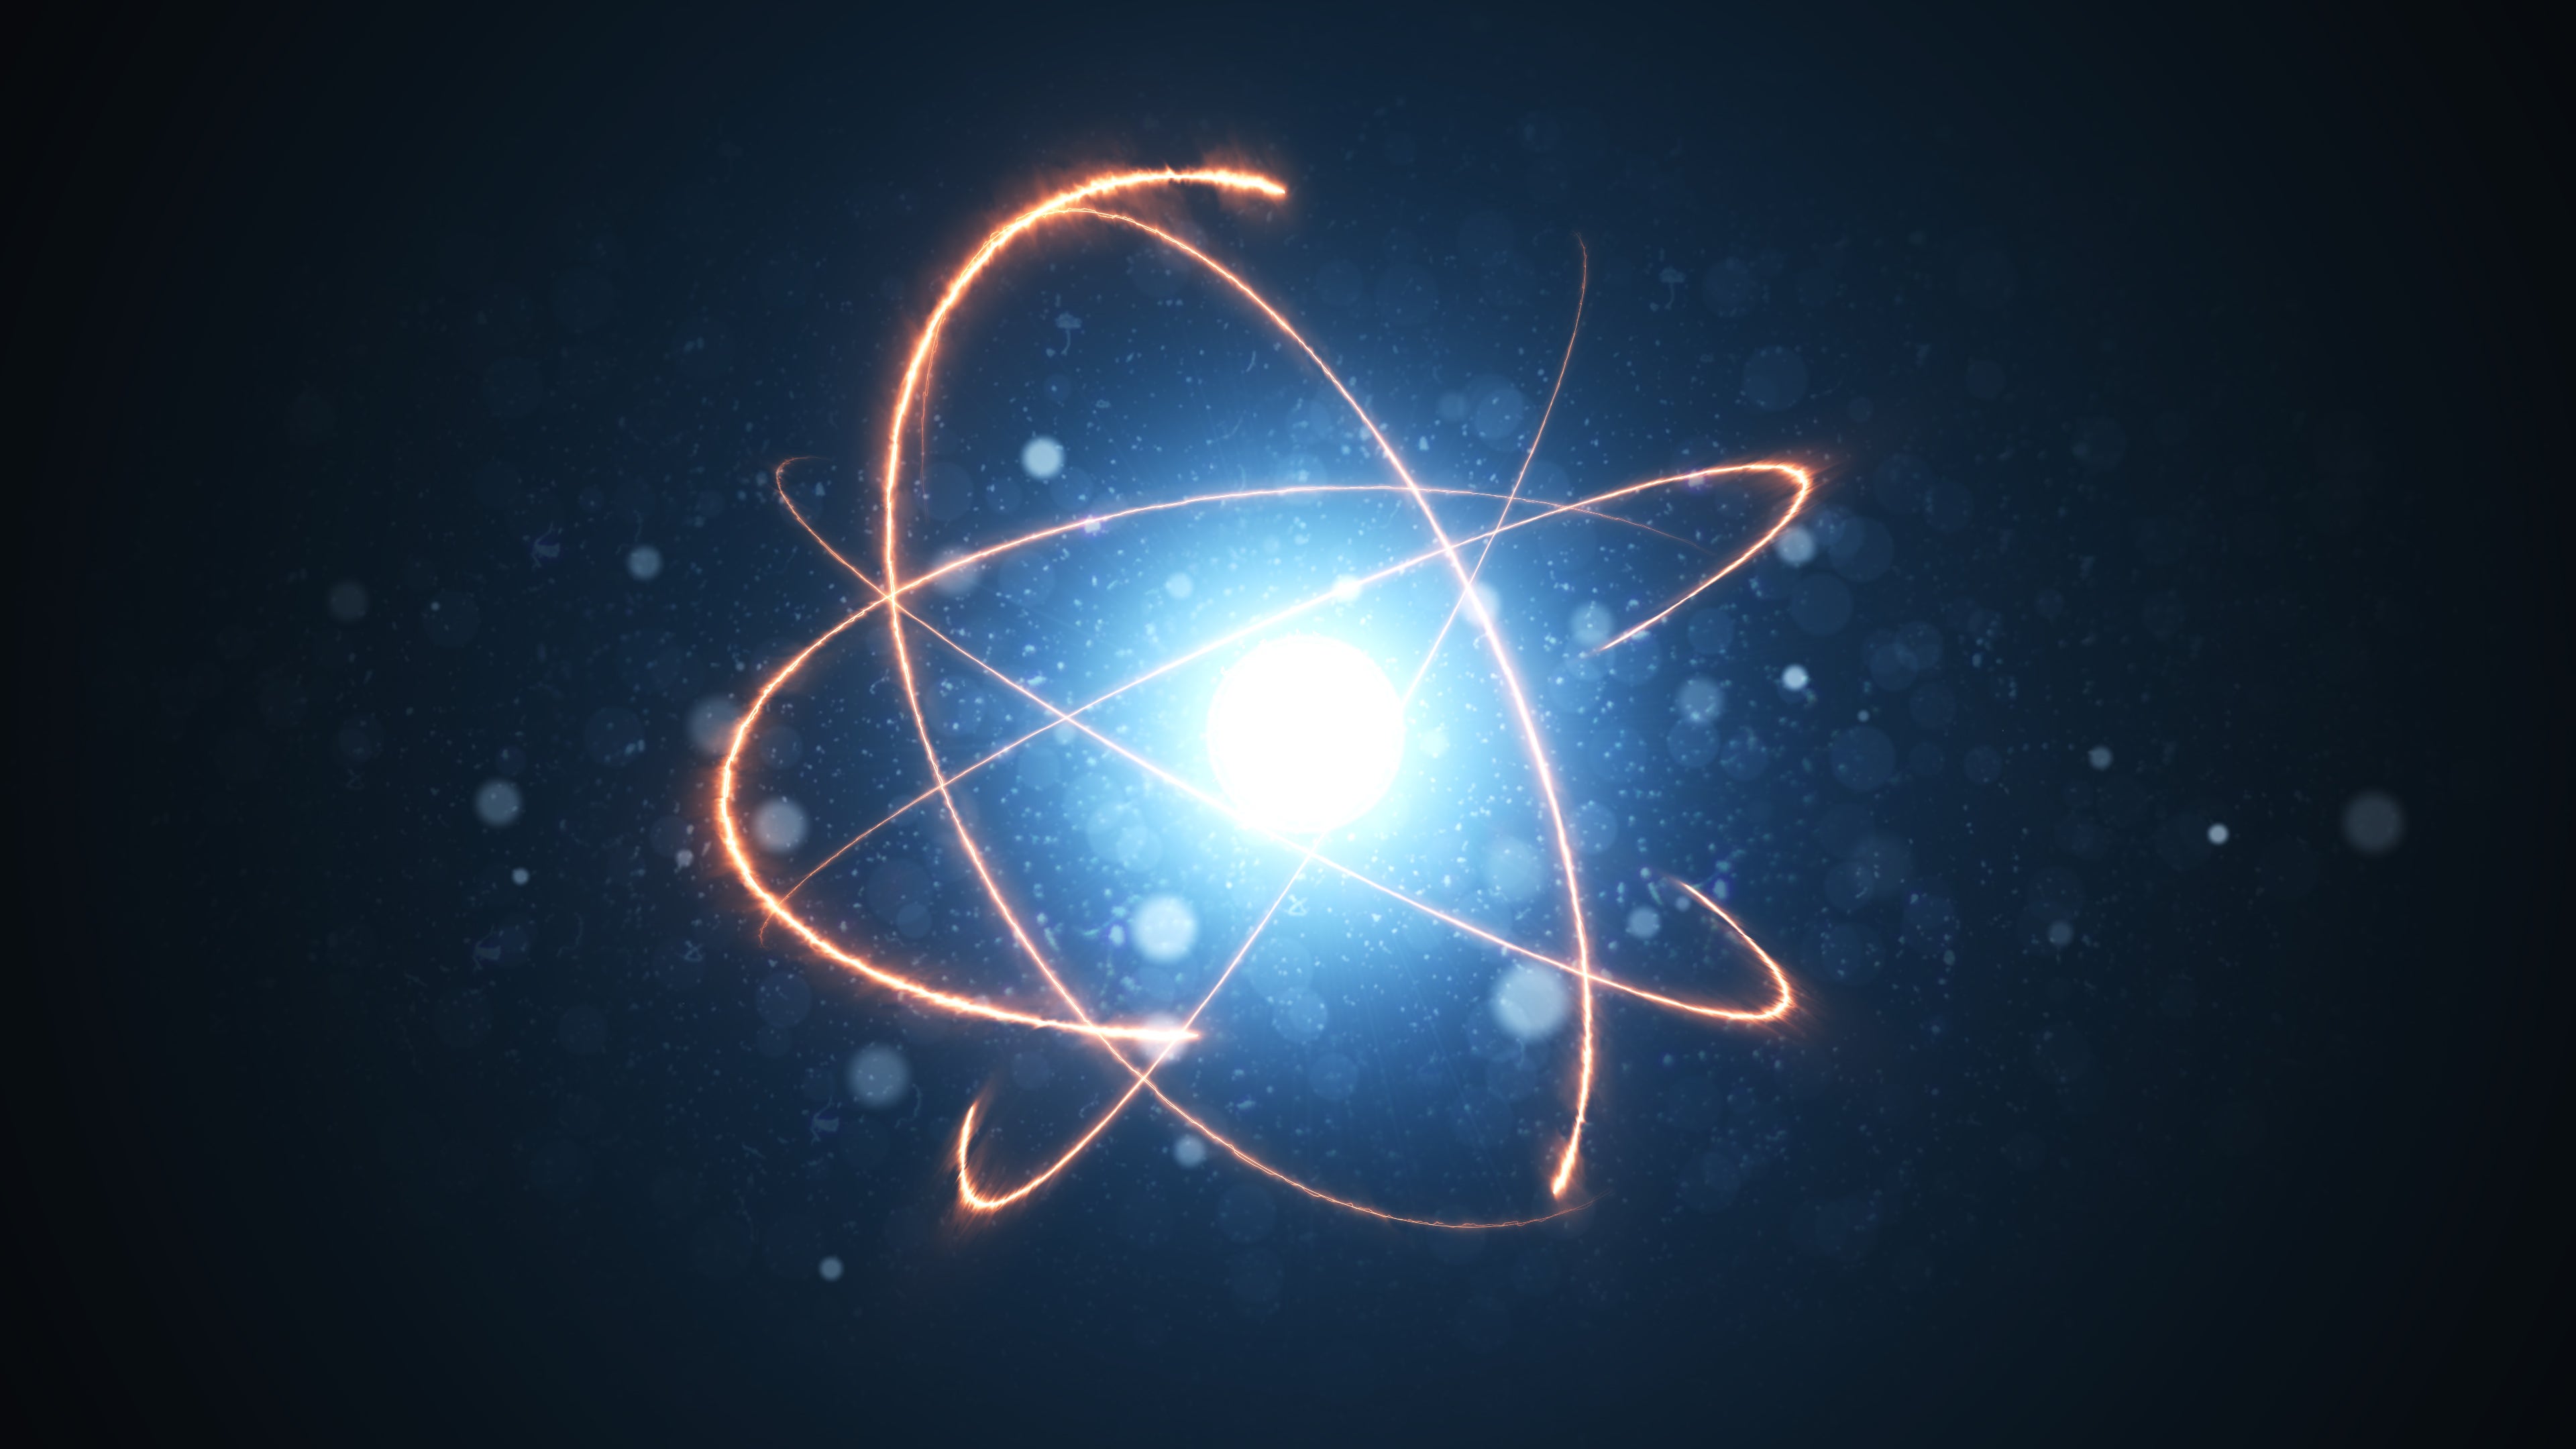 What Physicist Studies the Structure of Atoms and Radioactive Decay